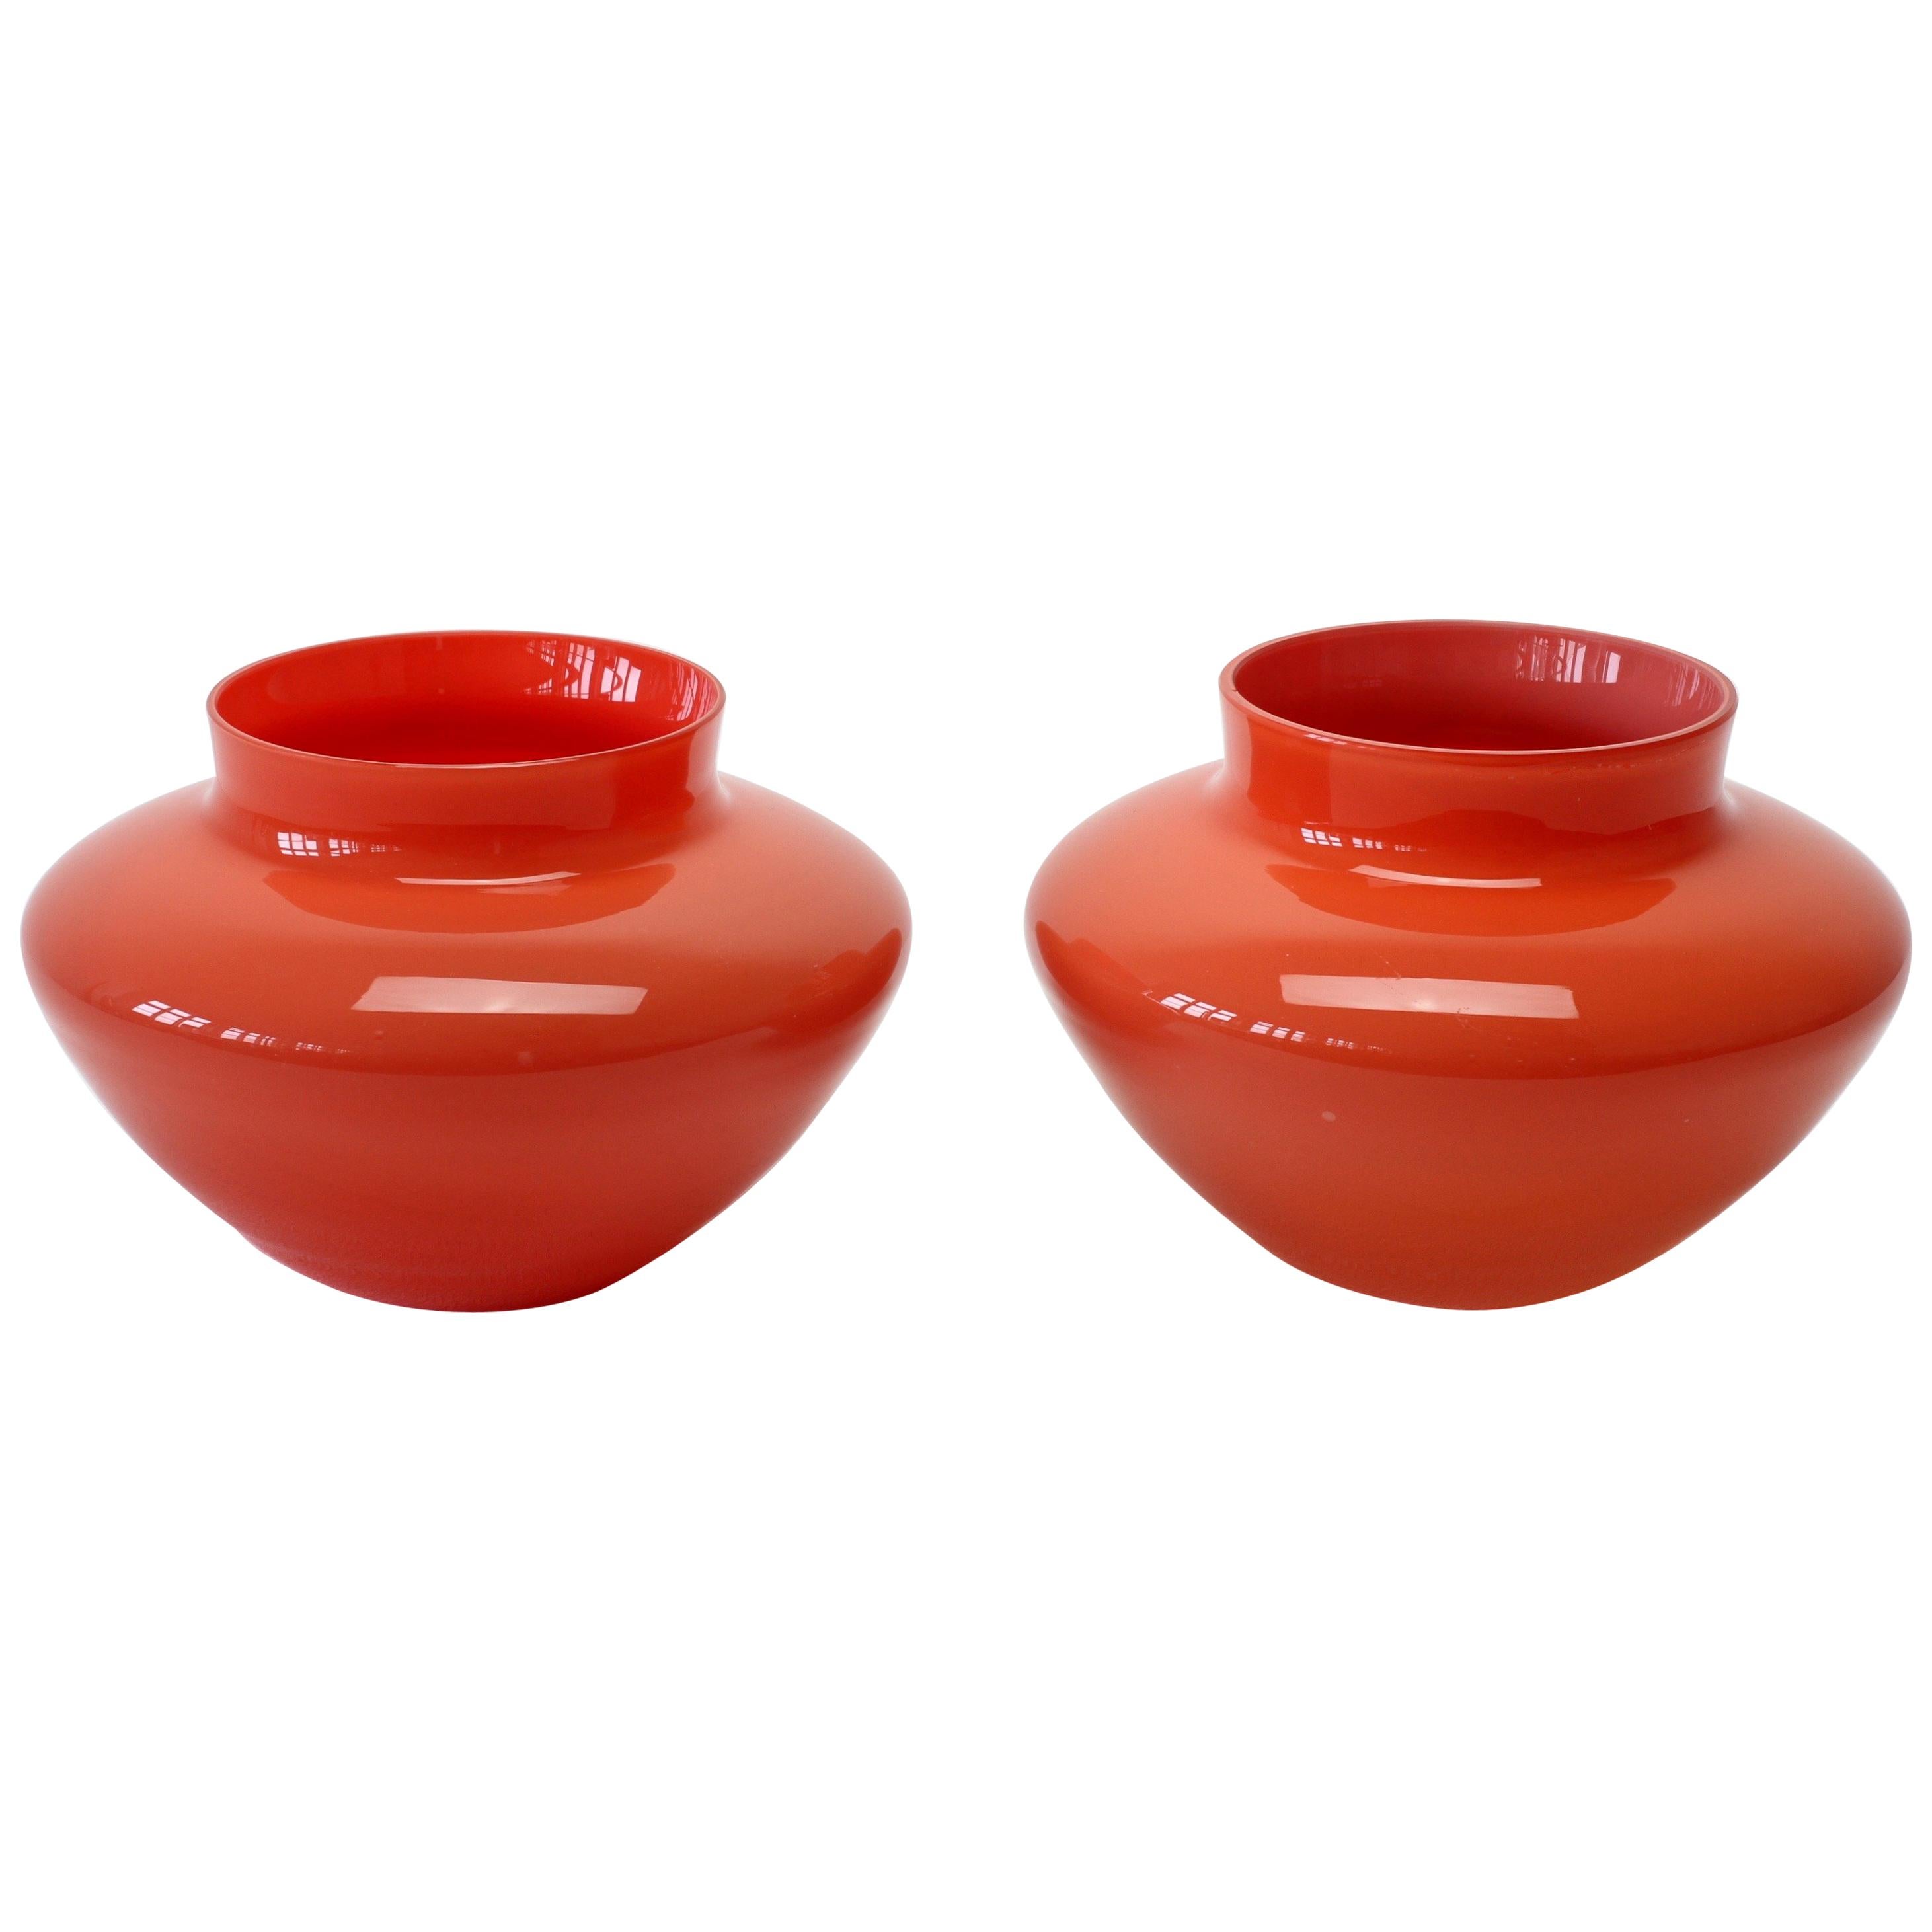 Cenedese Pair of Vintage Italian Red Murano Glass Bowls or Vases, circa 1967